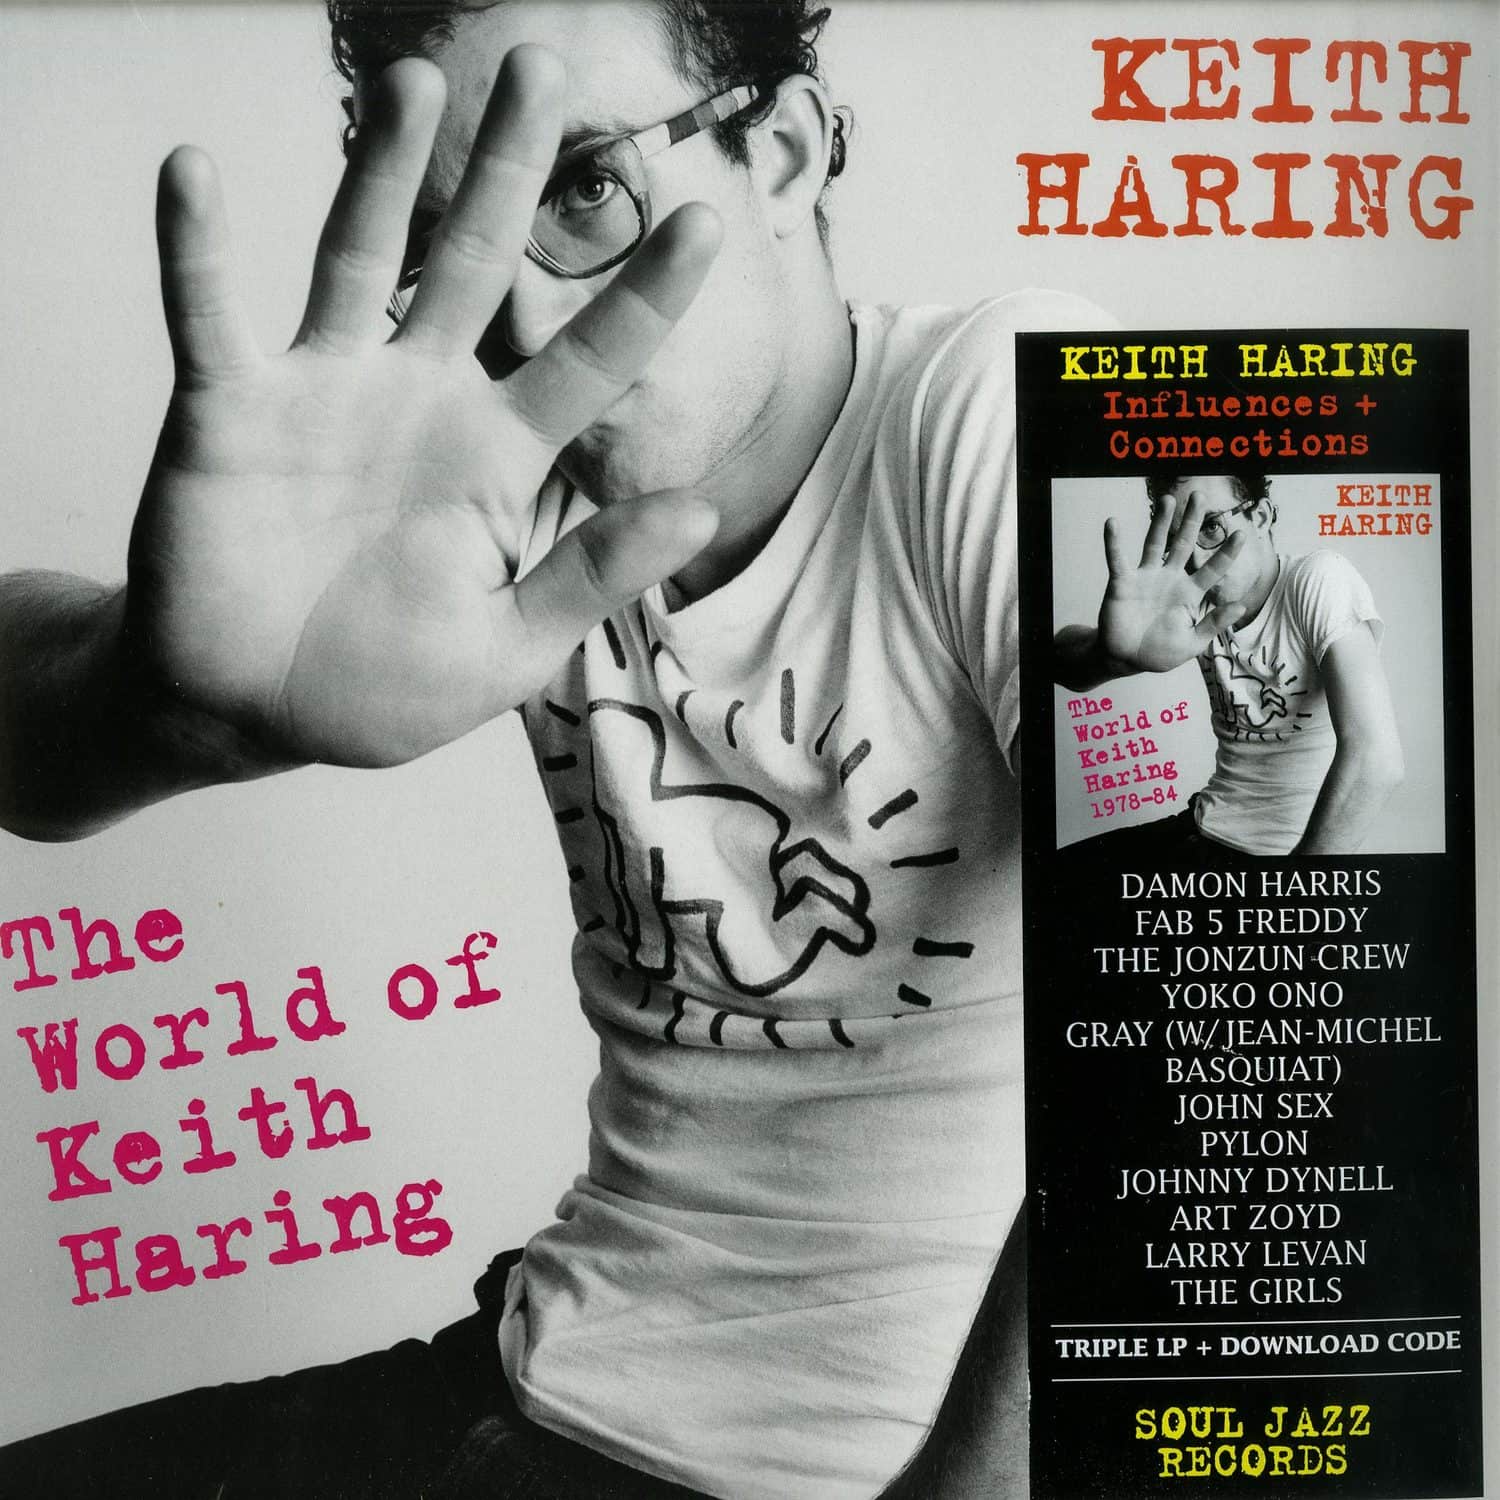 Various Artists - THE WORLD OF KEITH HARING 